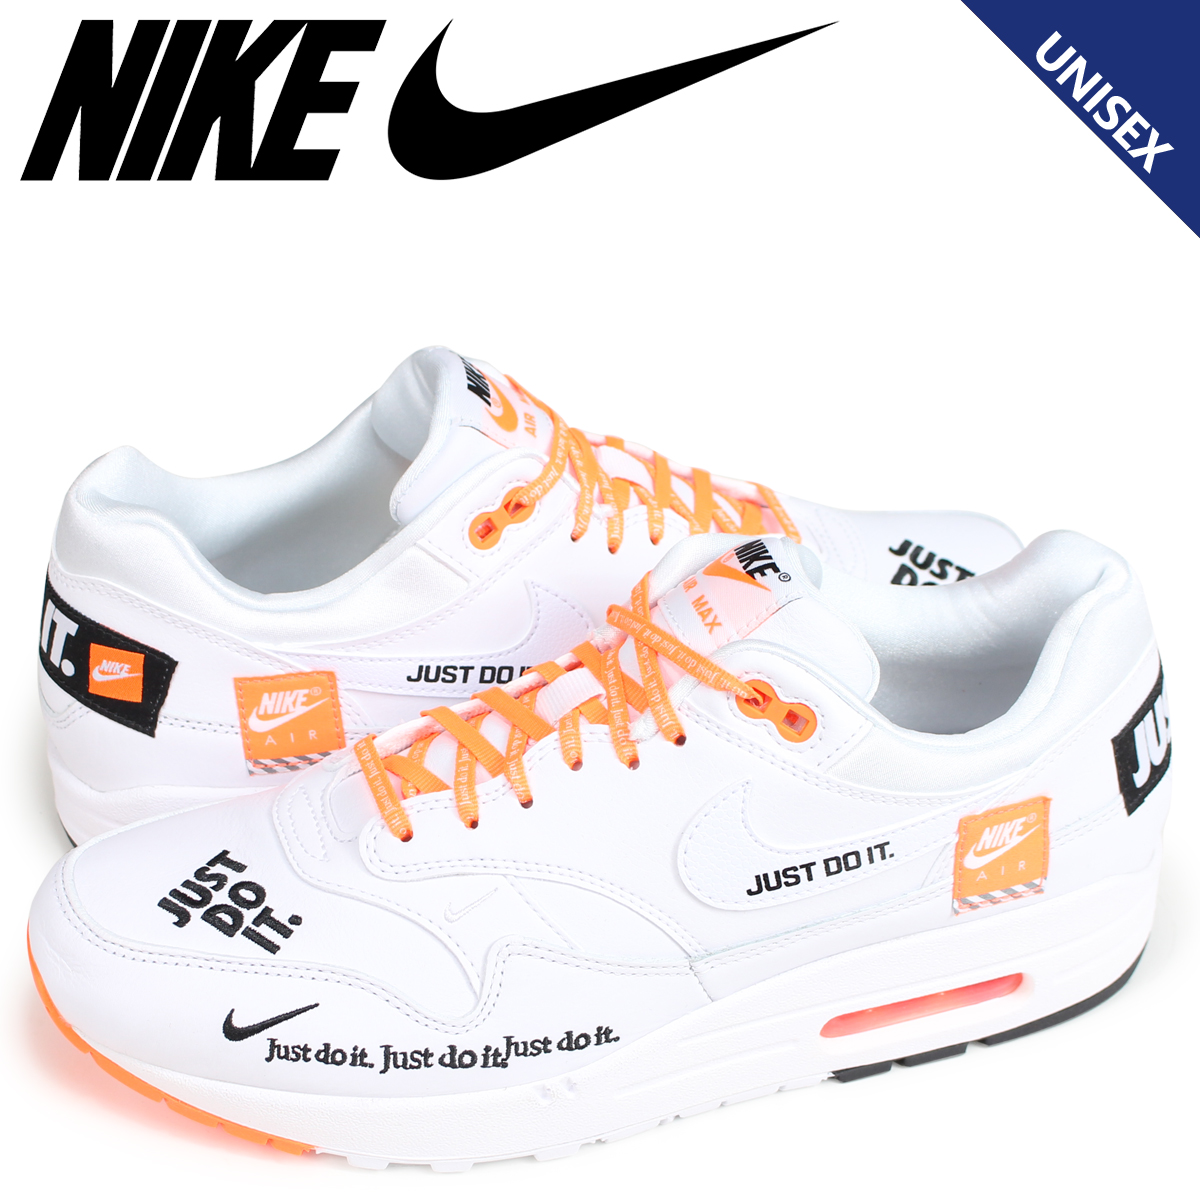 nike just do it shoes air max